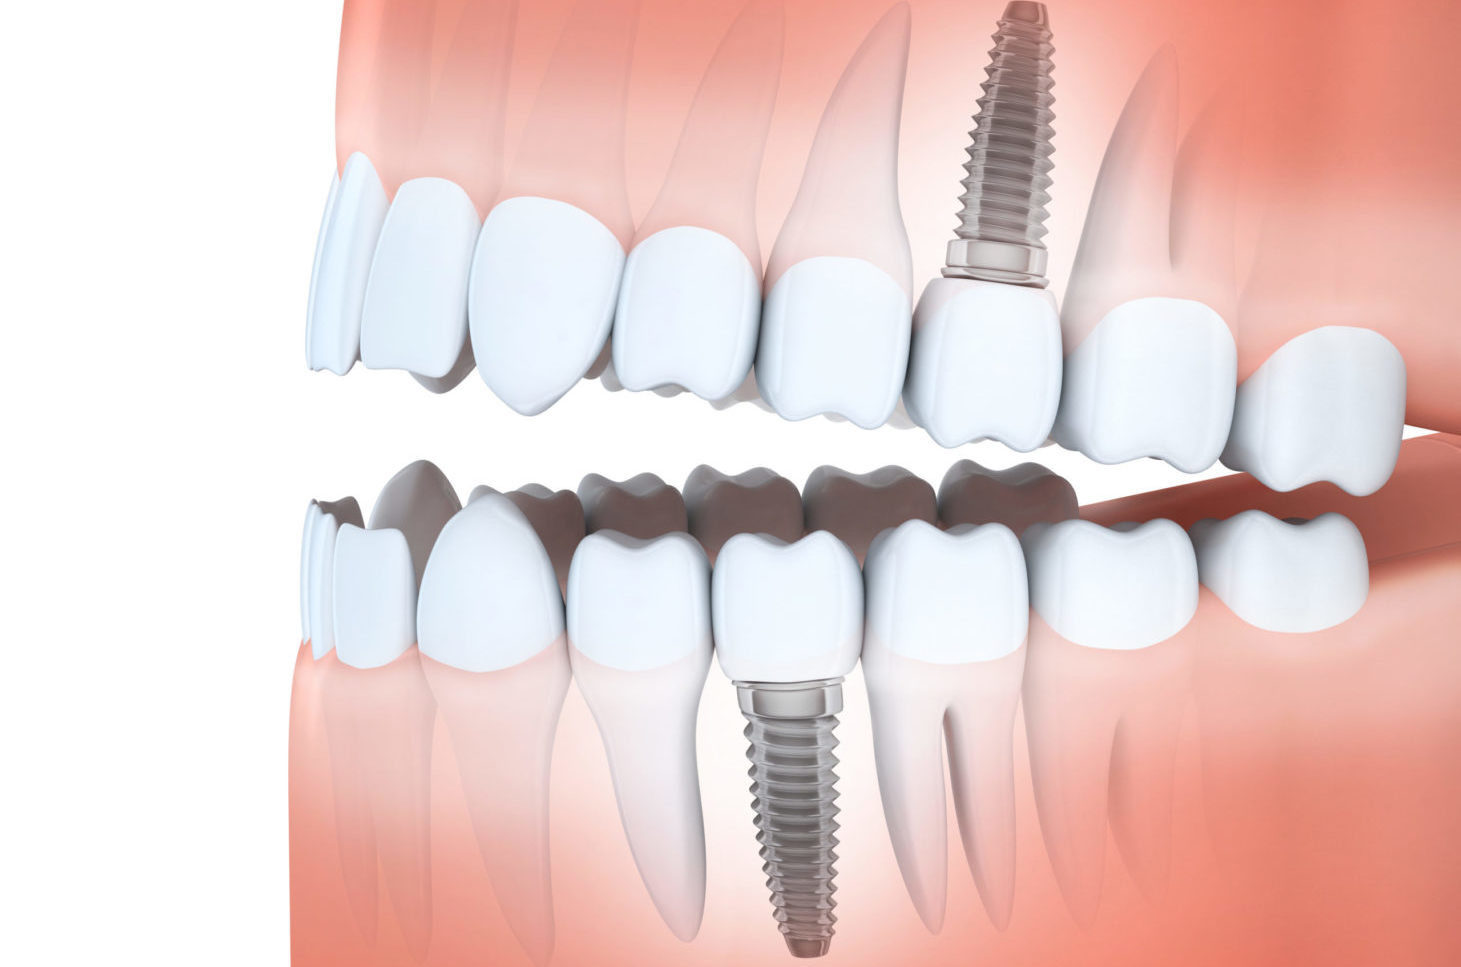 Human jaw and dental implants